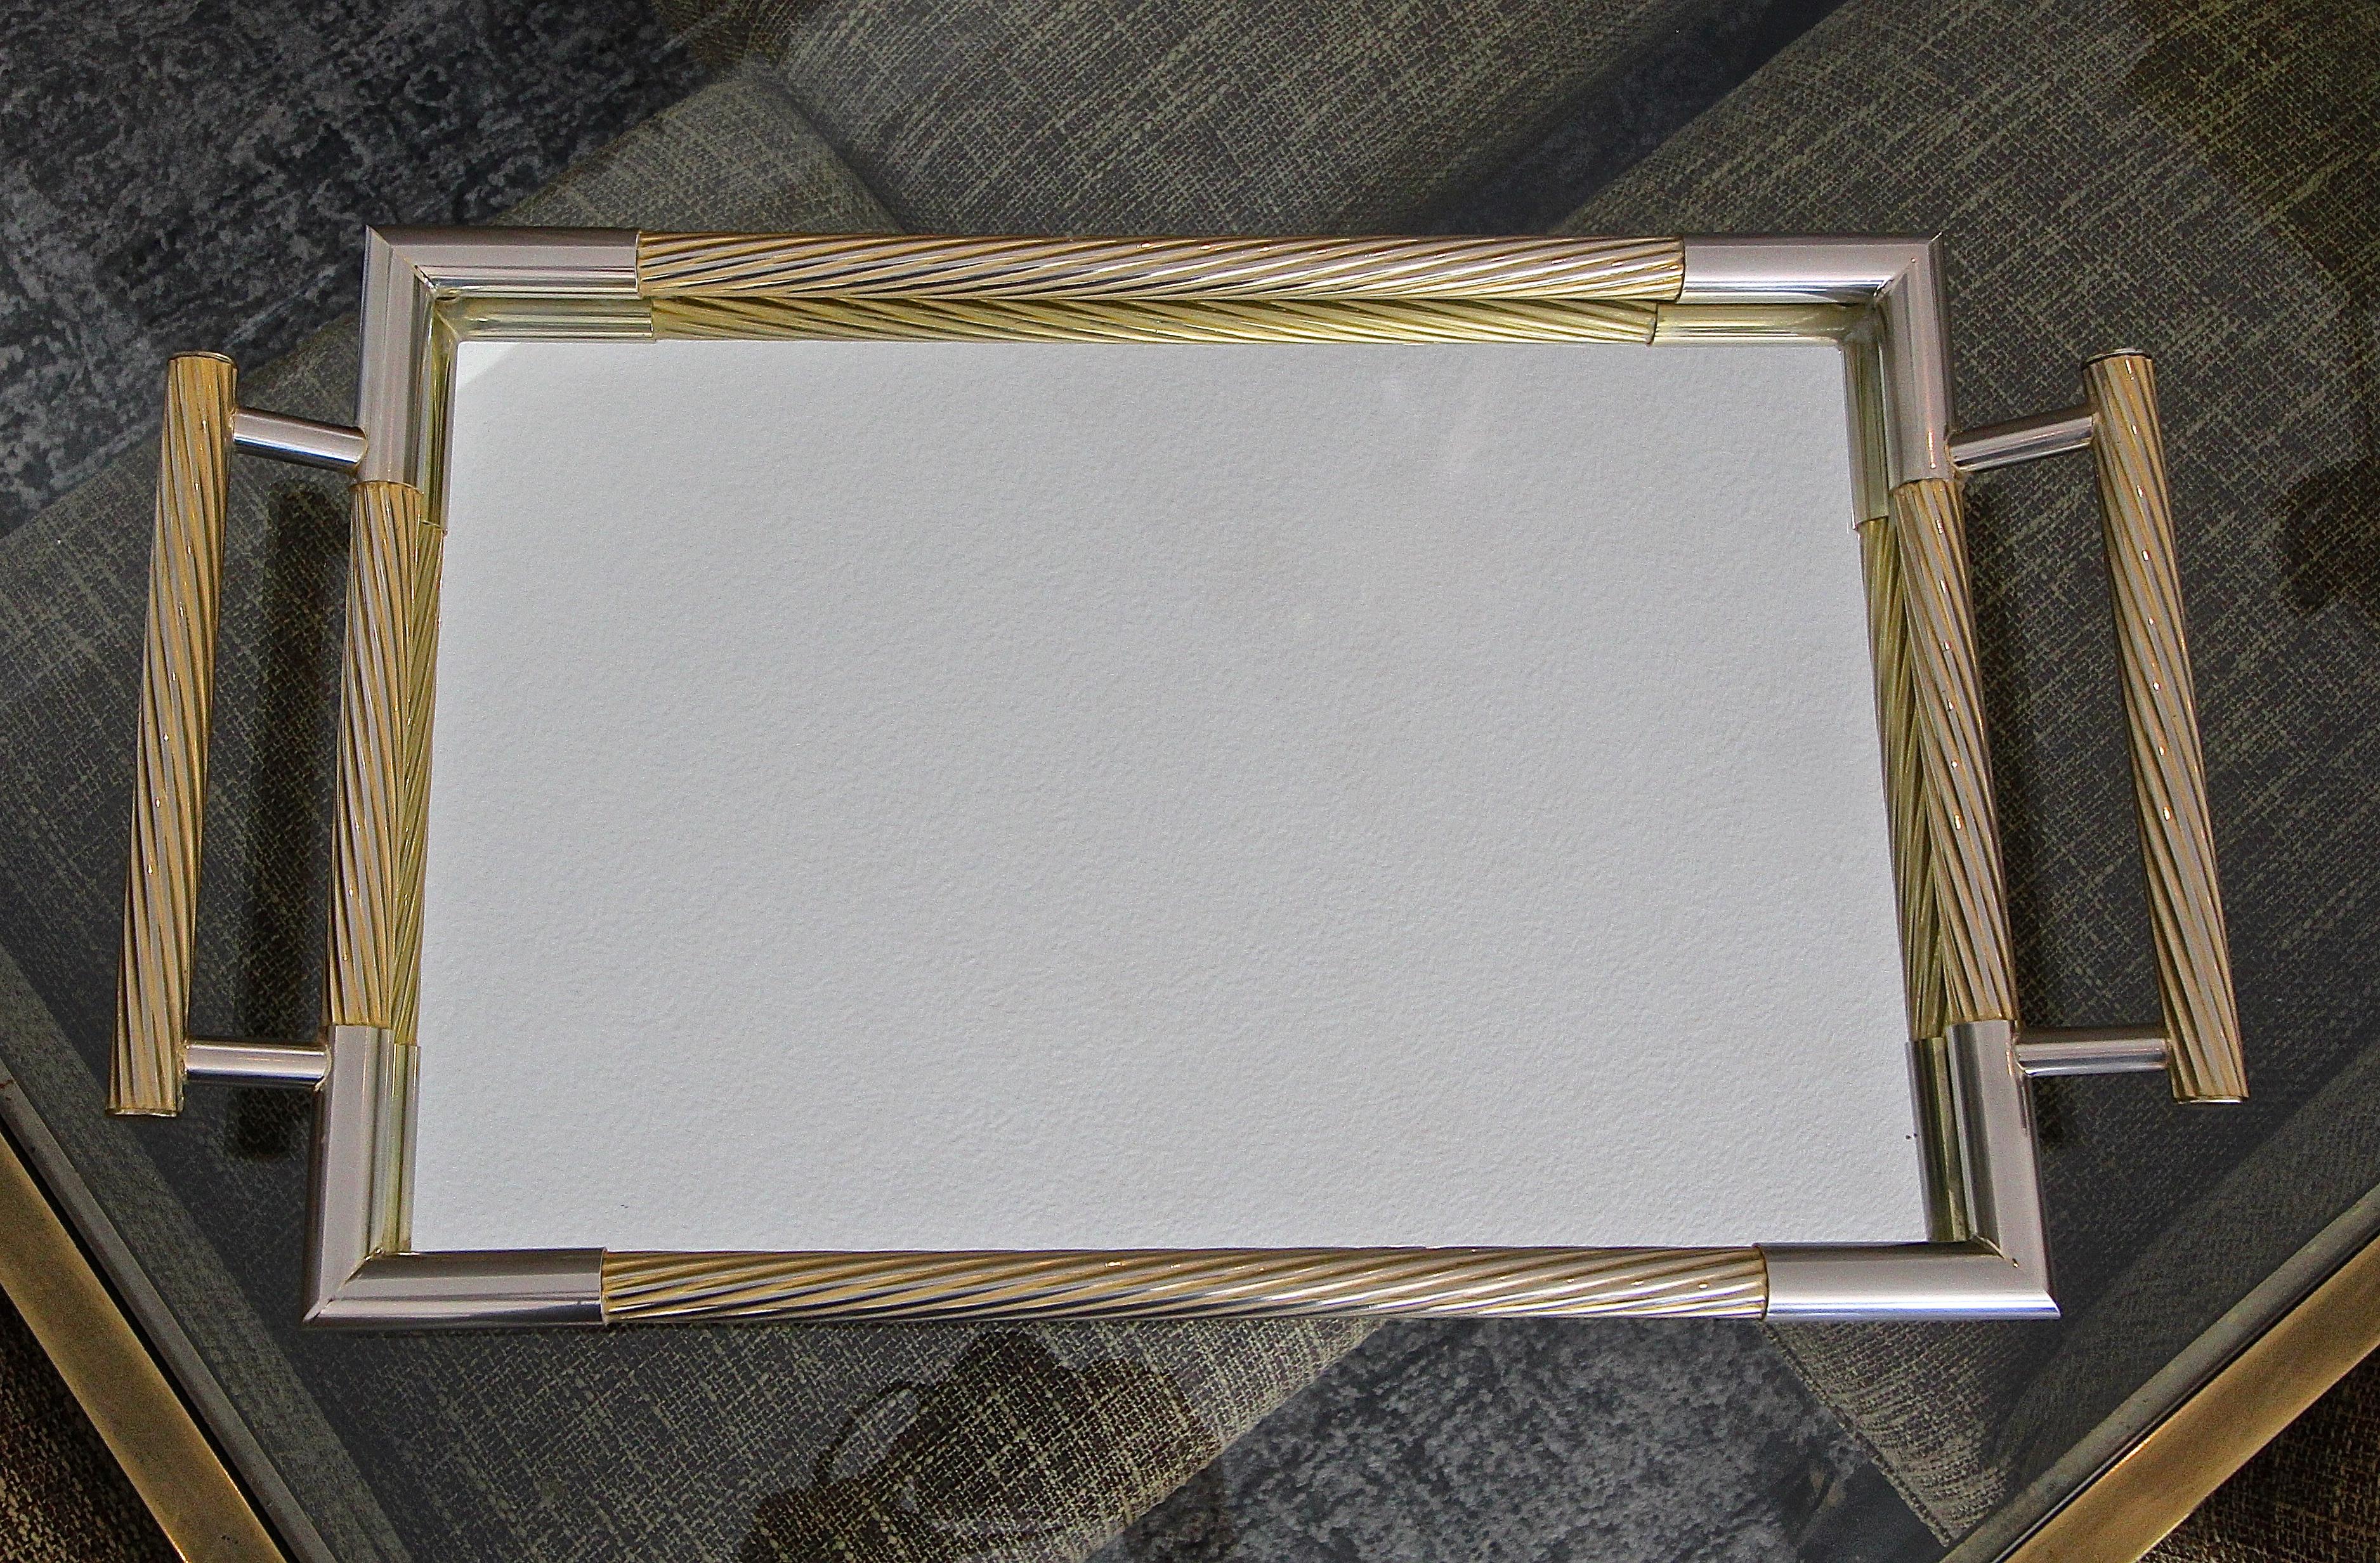 An attractive rectangle shaped serving tray made of non metallic metal with partial gold finish detailing. Inset into the tray is newer mirrored glass. The tray features clean lines with diagonal reeded rails and handles. Length with handles 23